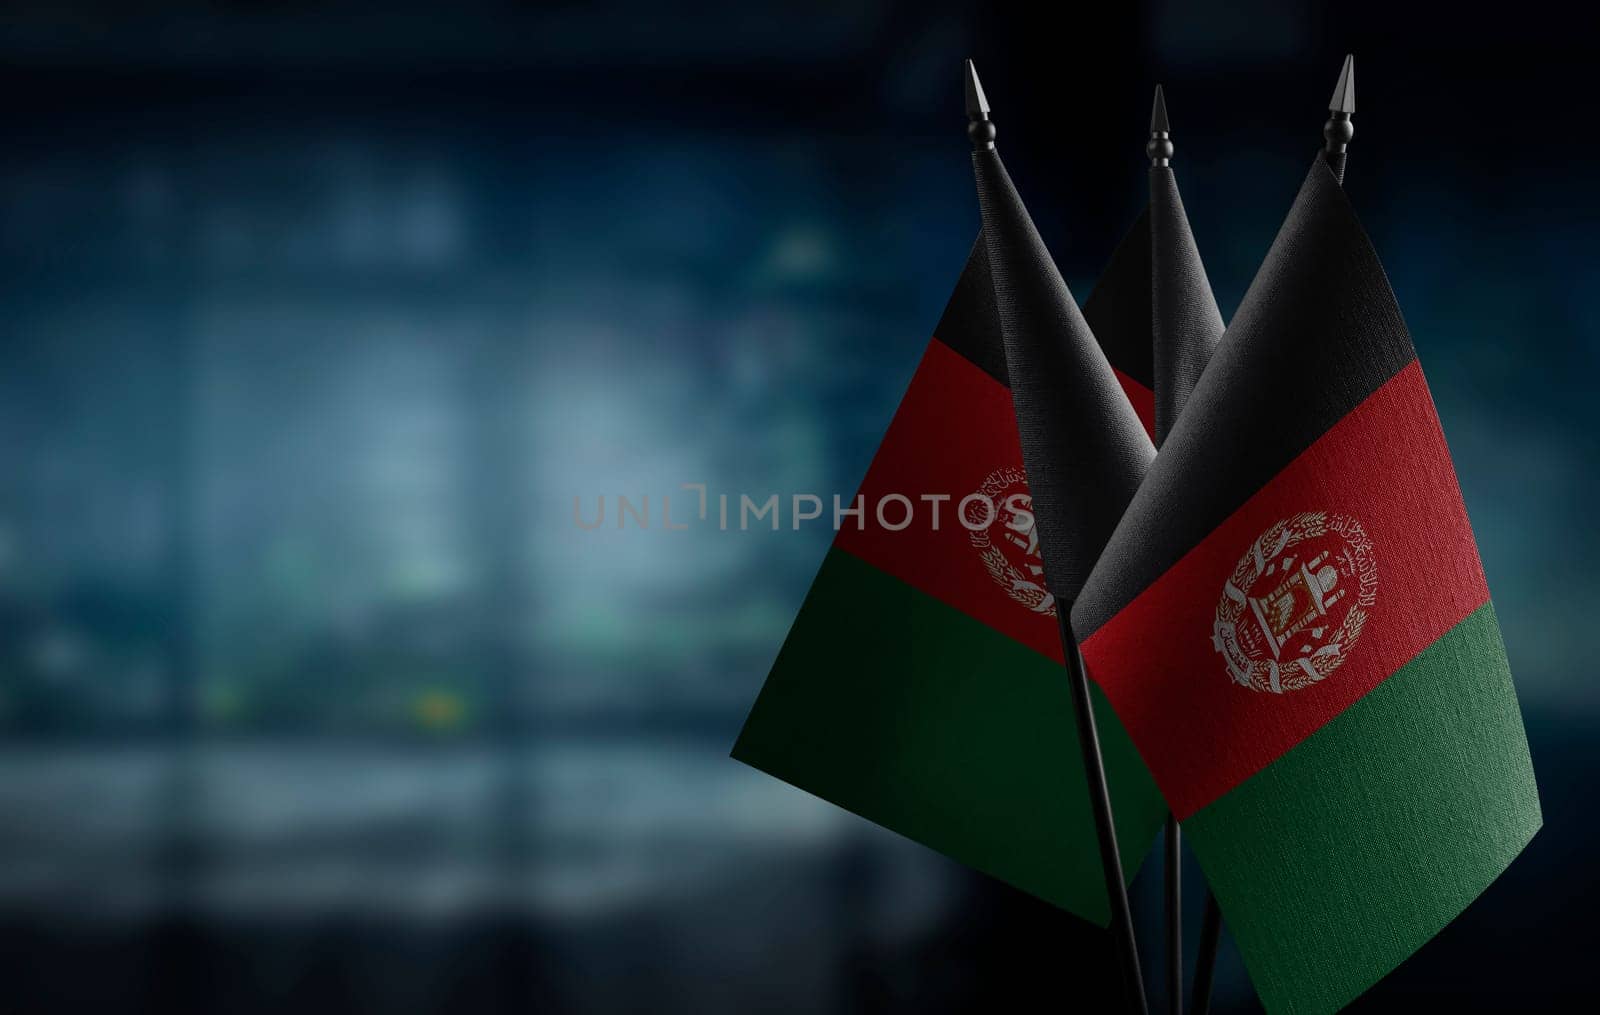 A small Afghanistan flag on an abstract blurry background.